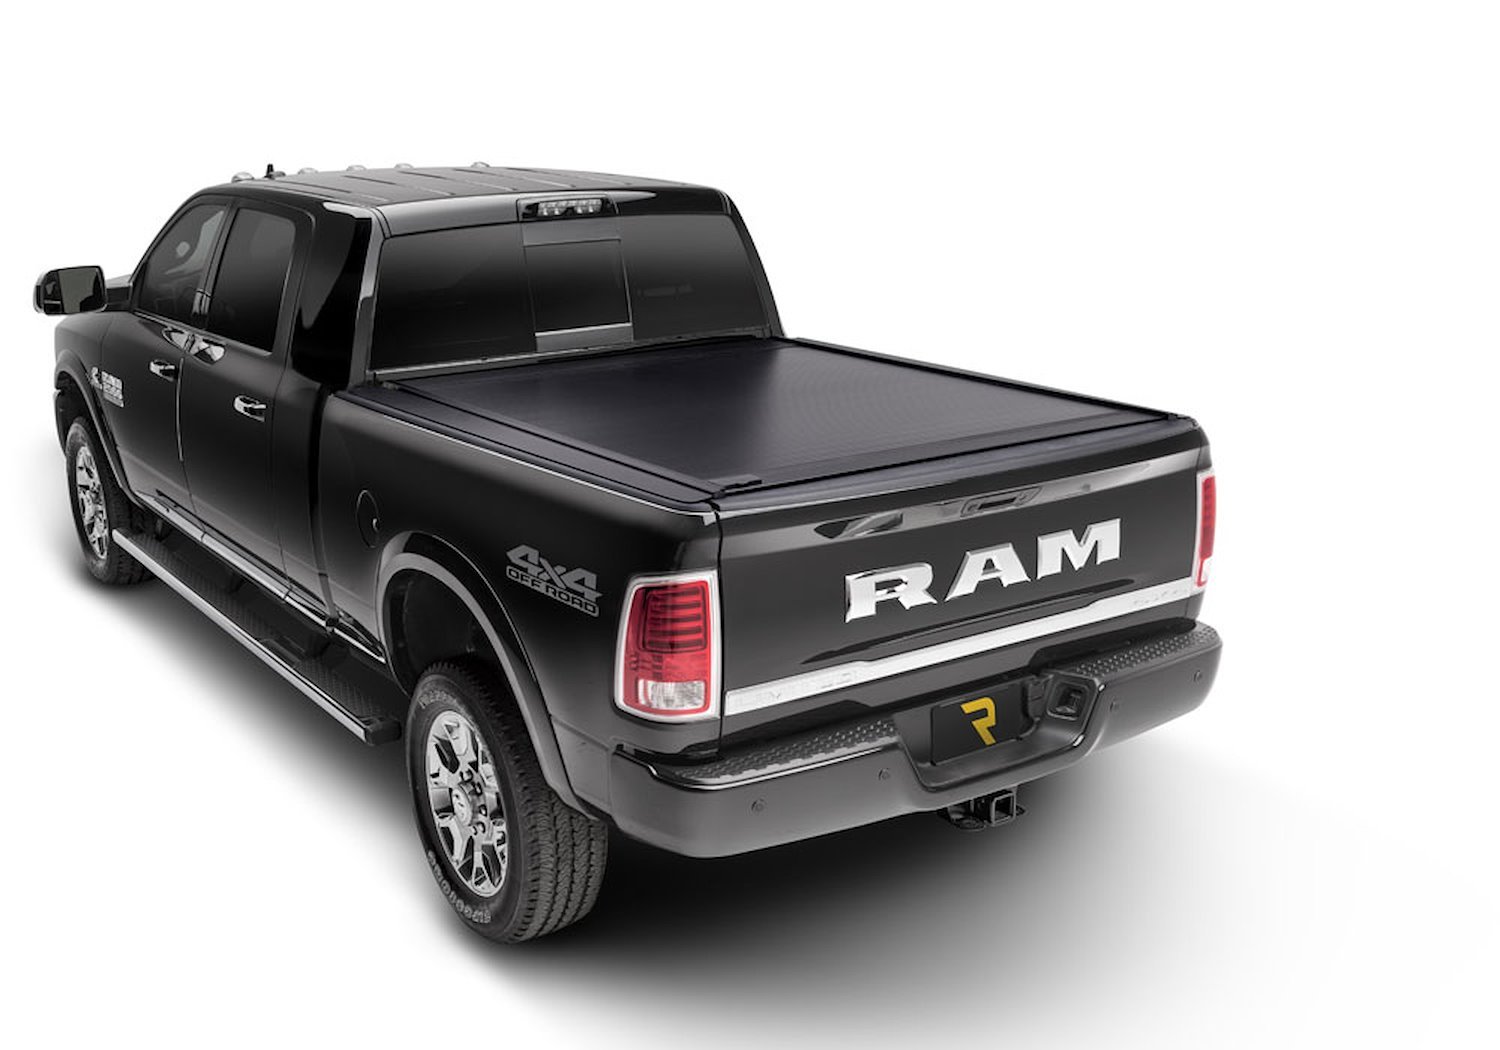 60222 RetraxOne MX Retractable Tonneau Cover 2002-2008 Dodge Ram 1500/2003-2009 2500/3500 6' 4" Bed without Stake Pockets